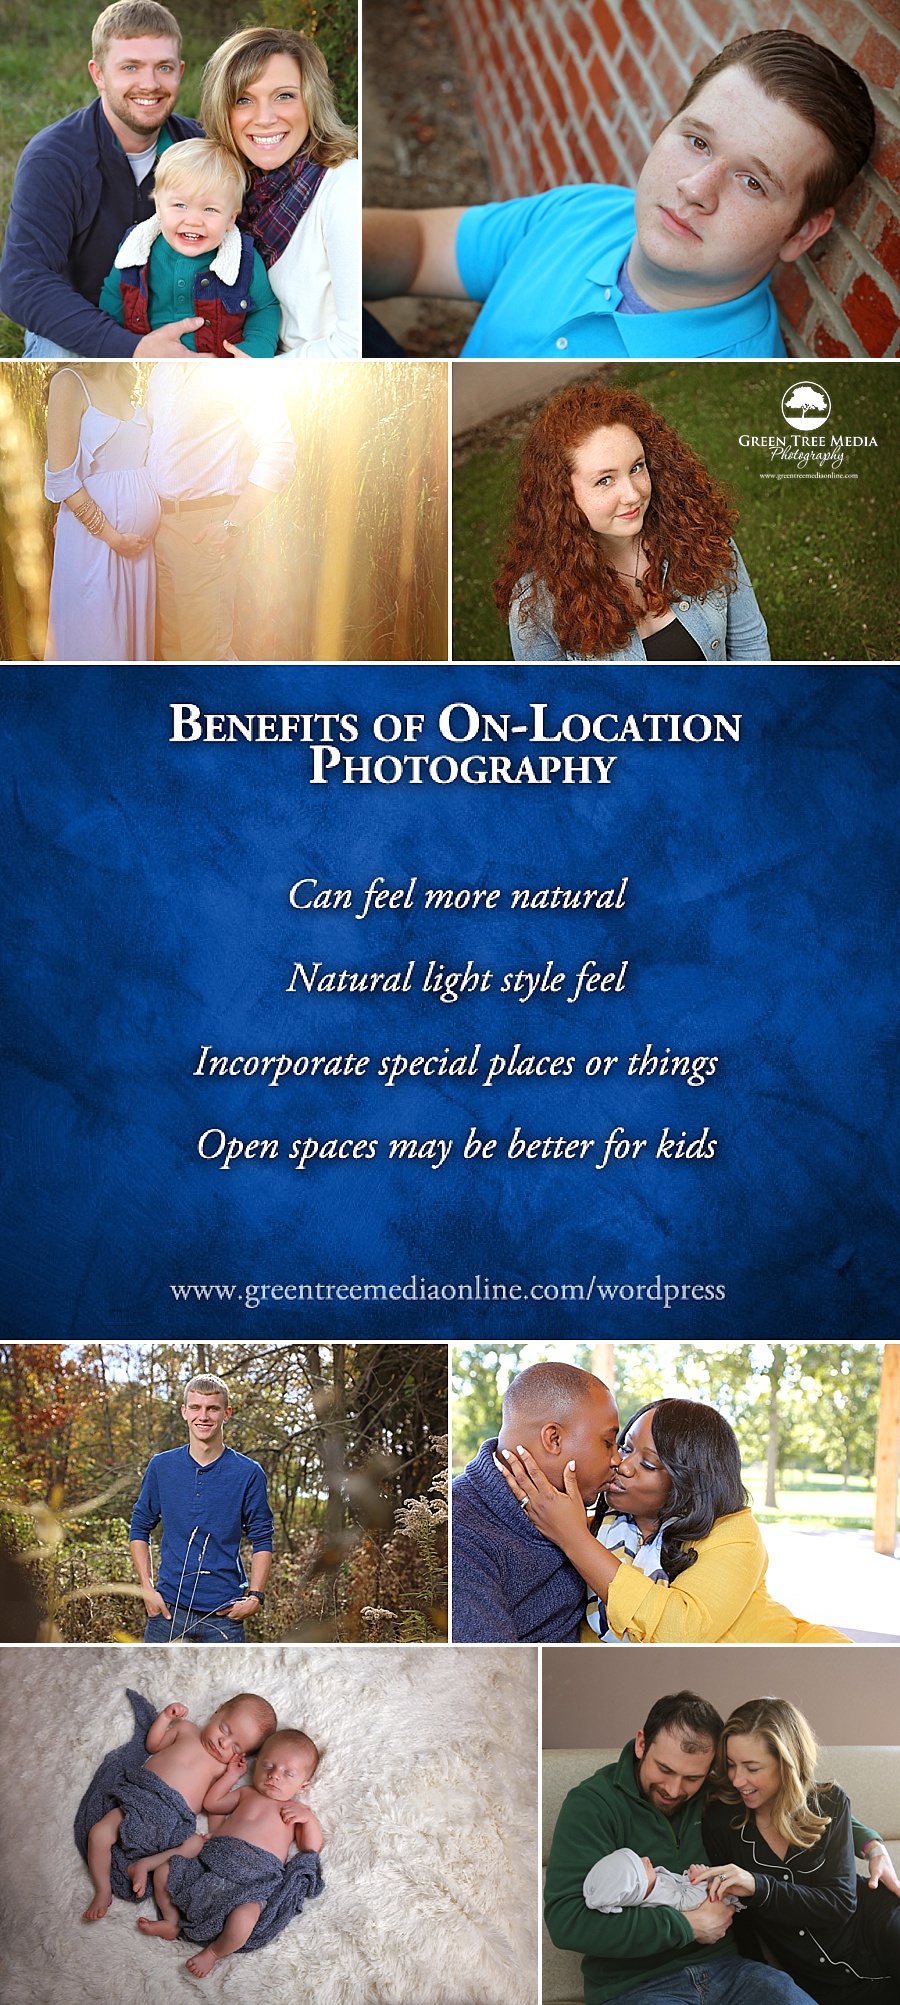 Benefits of On-Location Photography